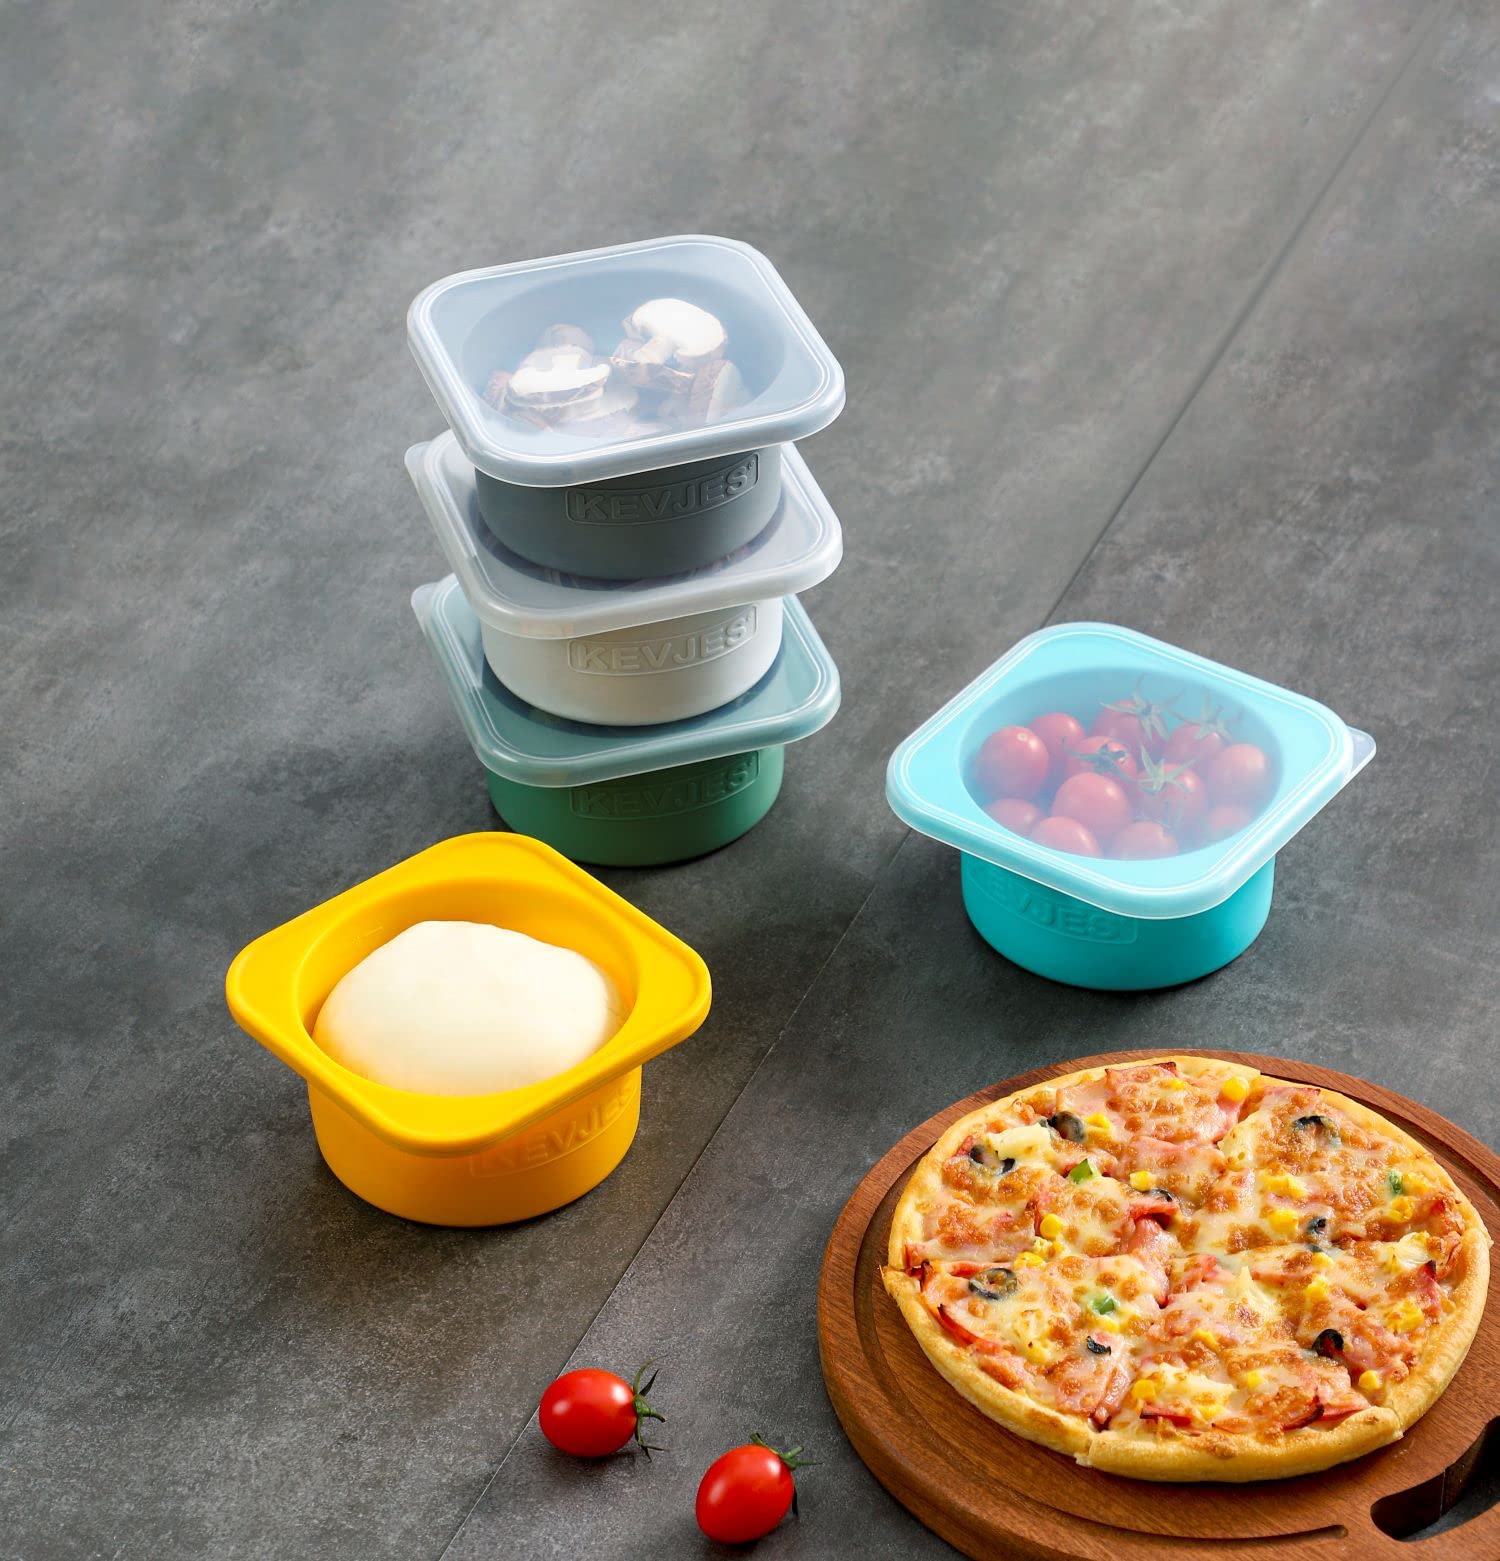 KEVJES Stackable Silicone Artisan Pizza Dough Proofing Containers with Lids pizza making accessories (1 Yellow+1 Green+1Blue+1 Gray+1 Space Gray)